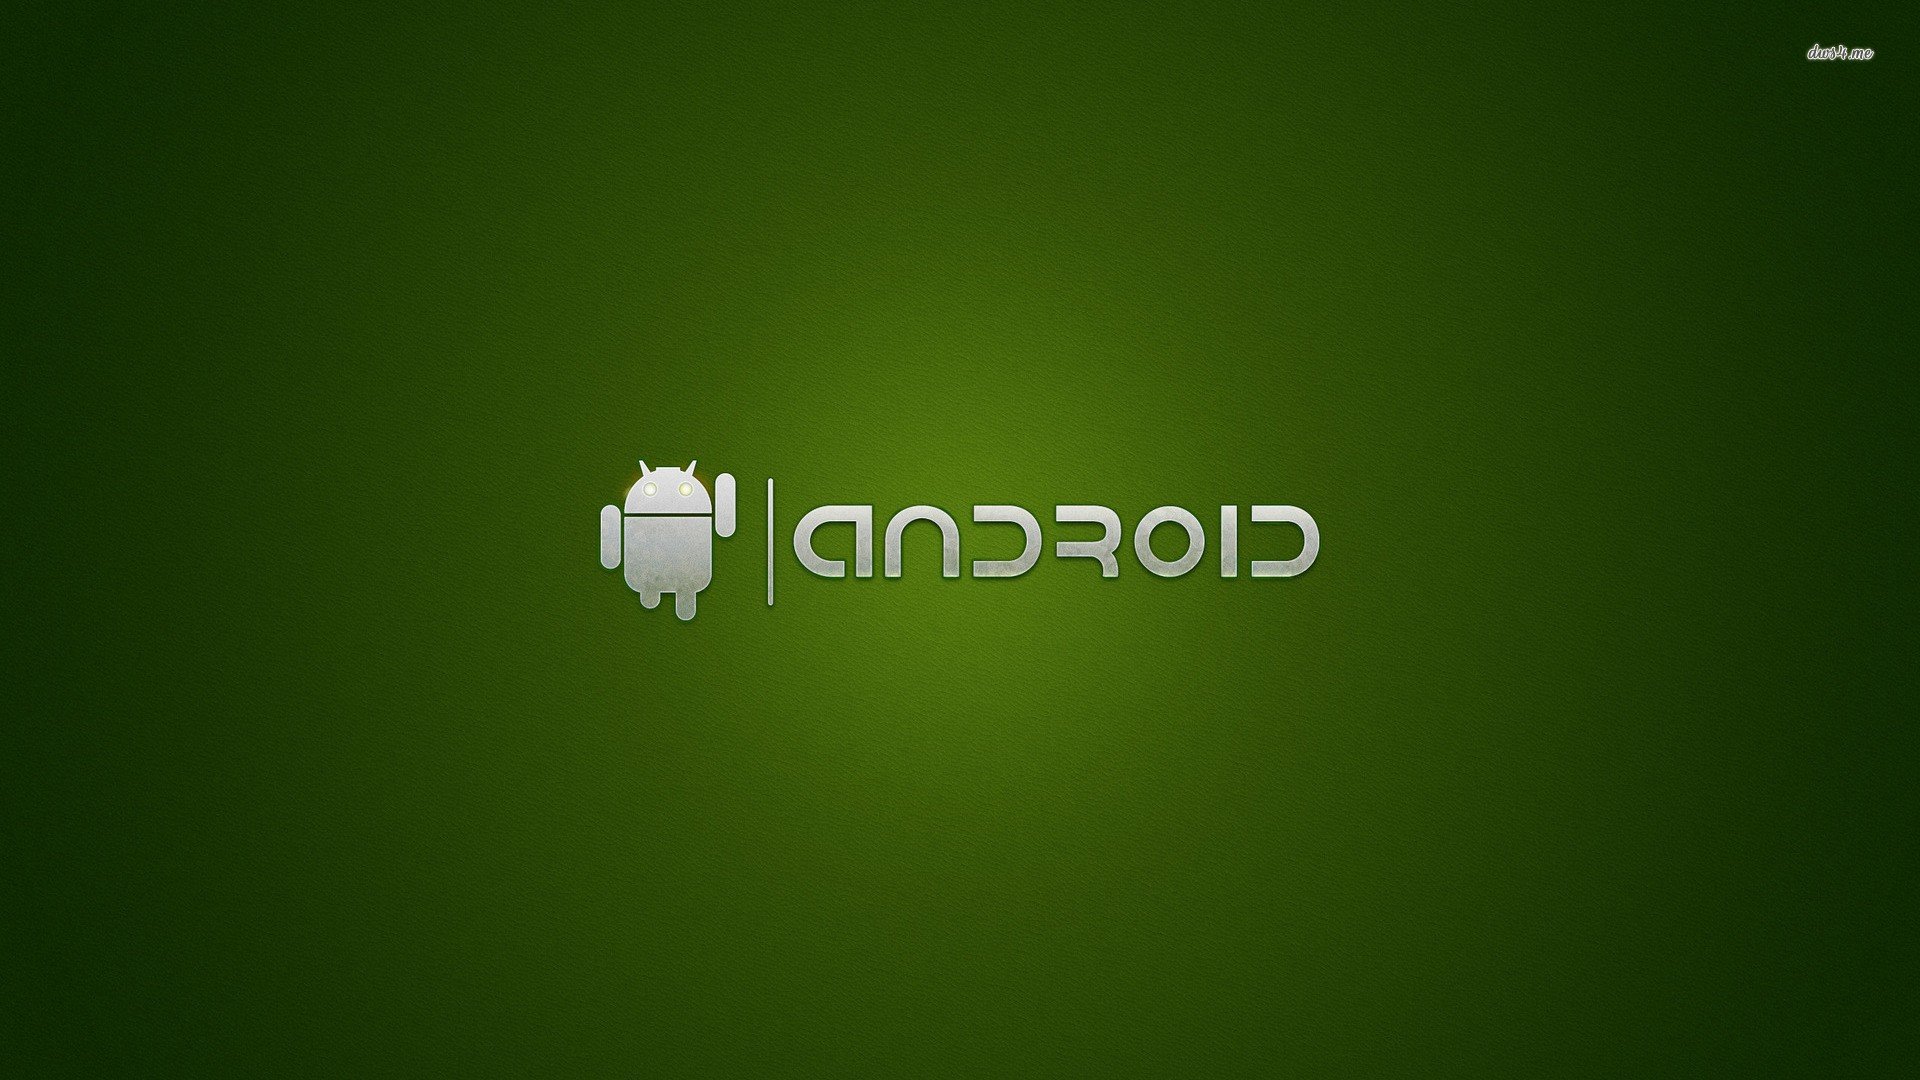 Android (operating system), Green Wallpaper